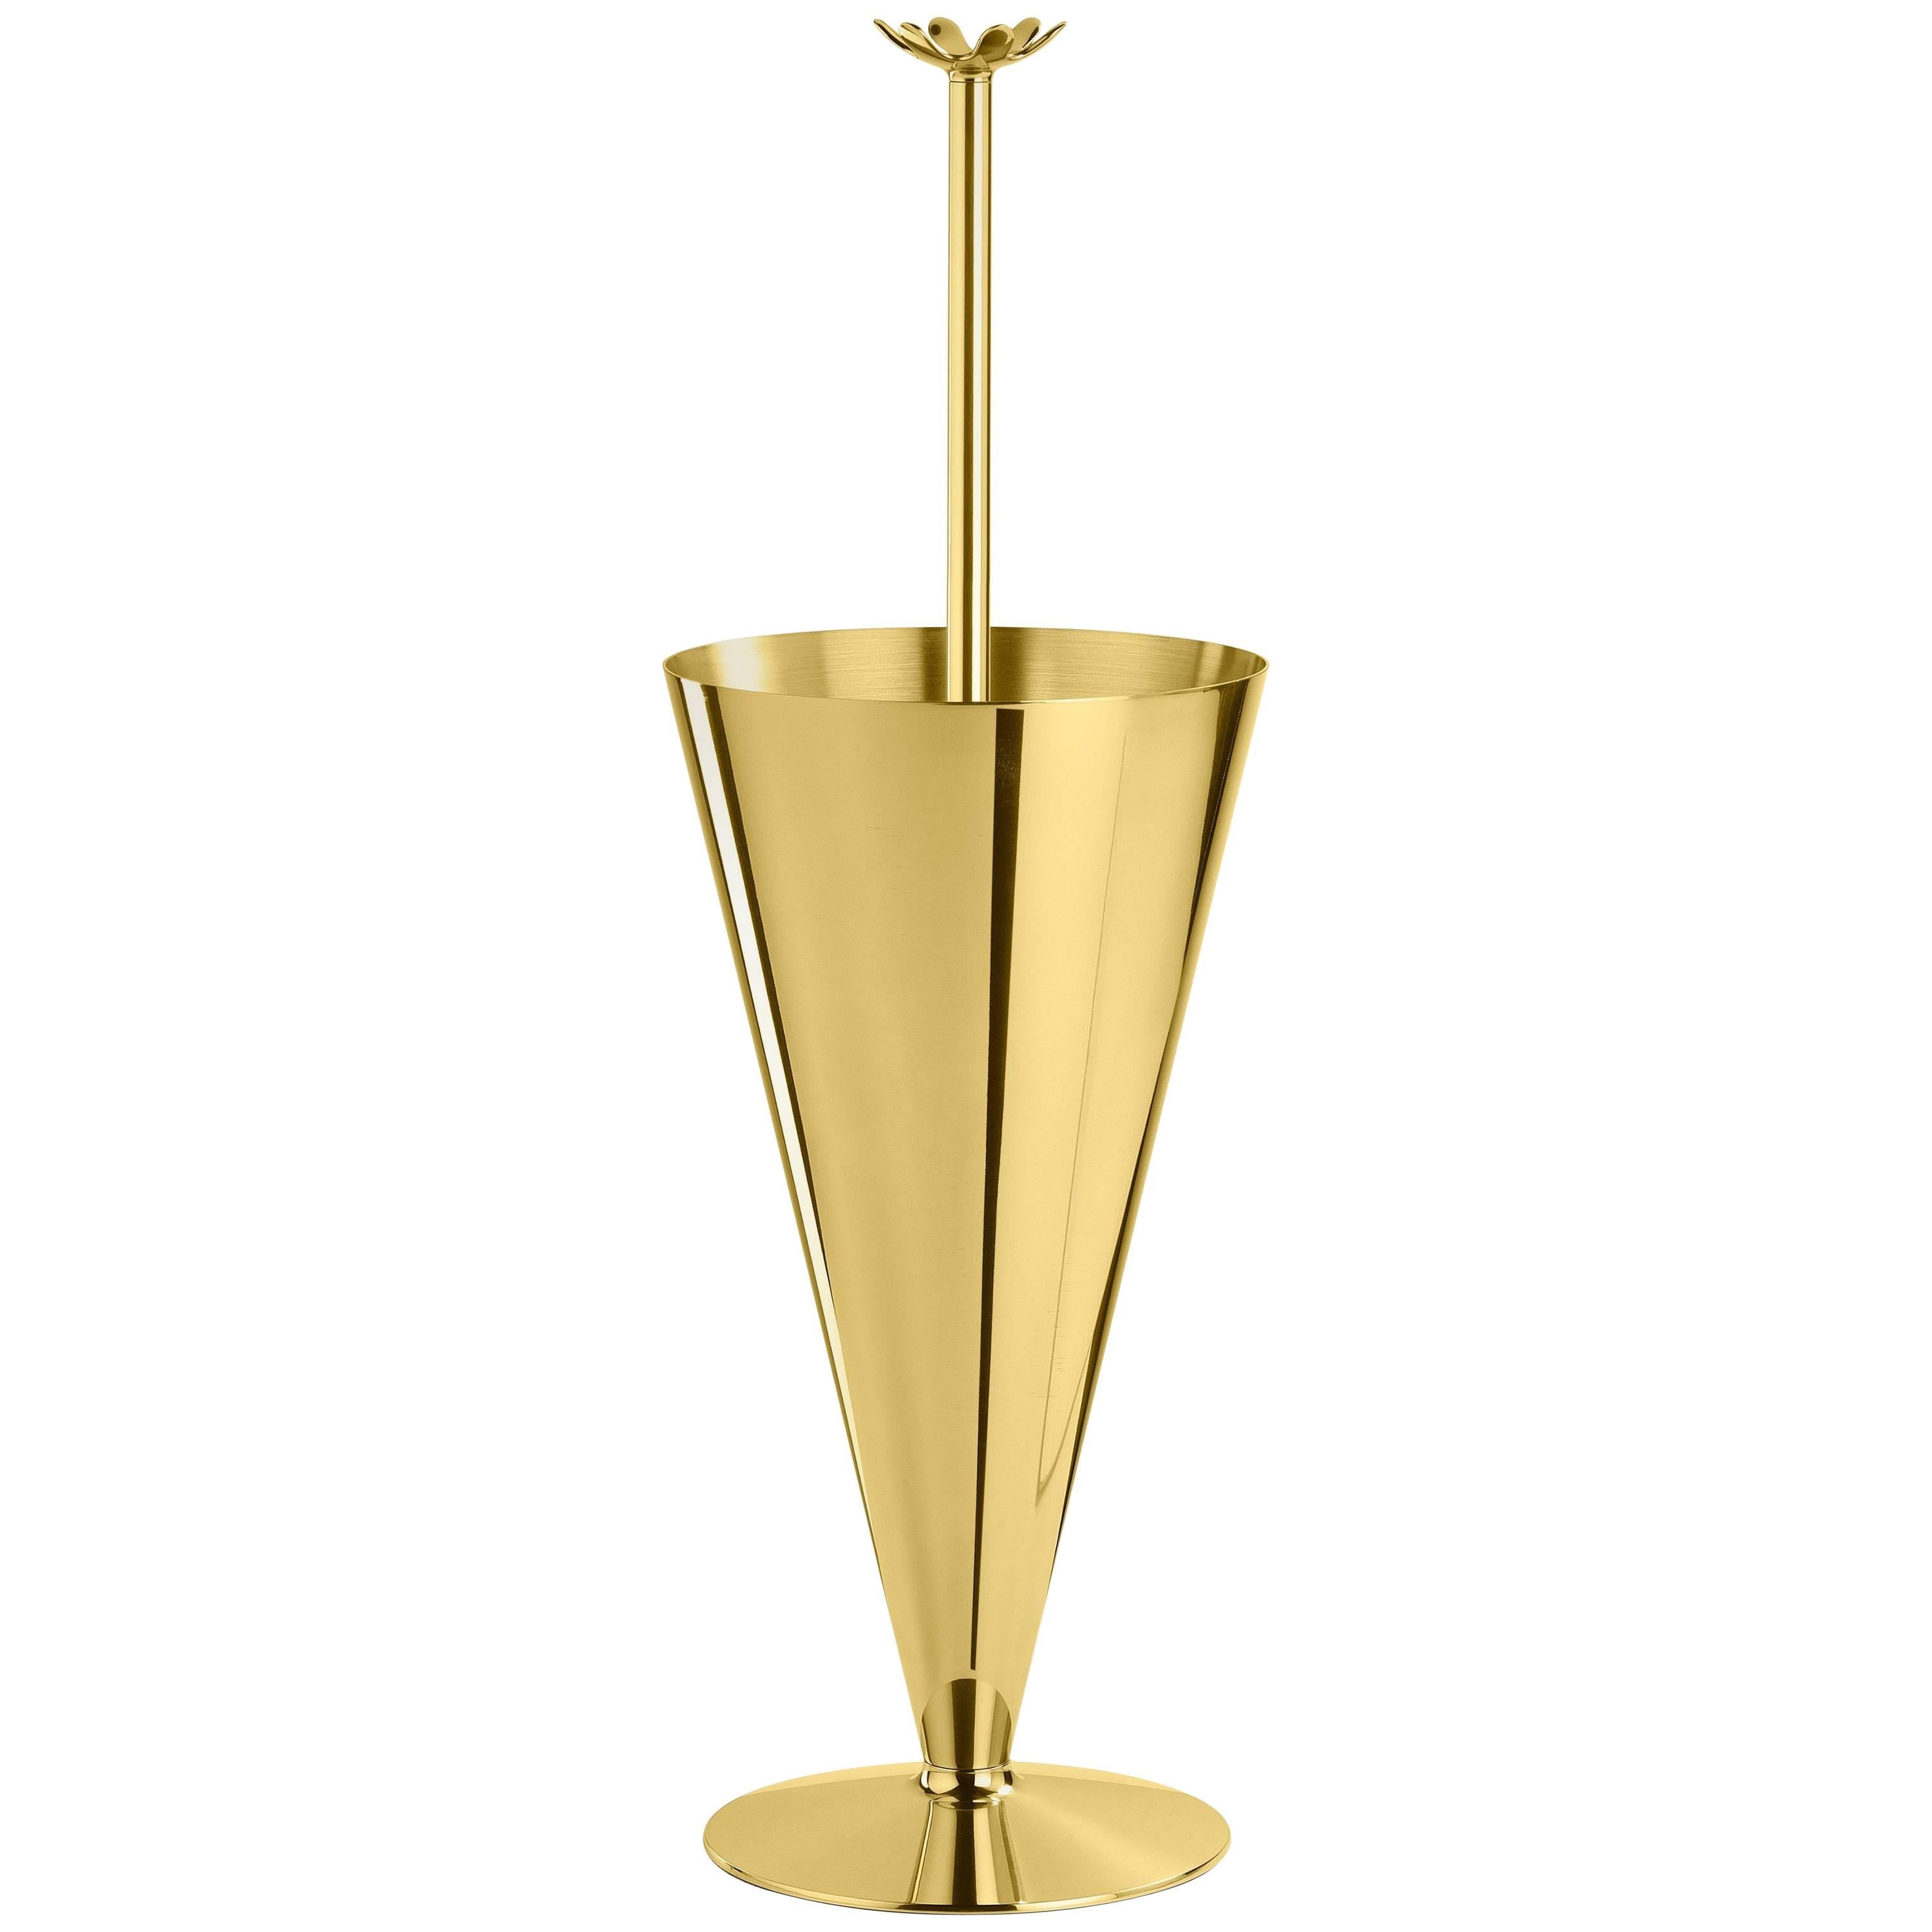 Ghidini 1961 Butler Umbrella Stand in Polished Brass For Sale